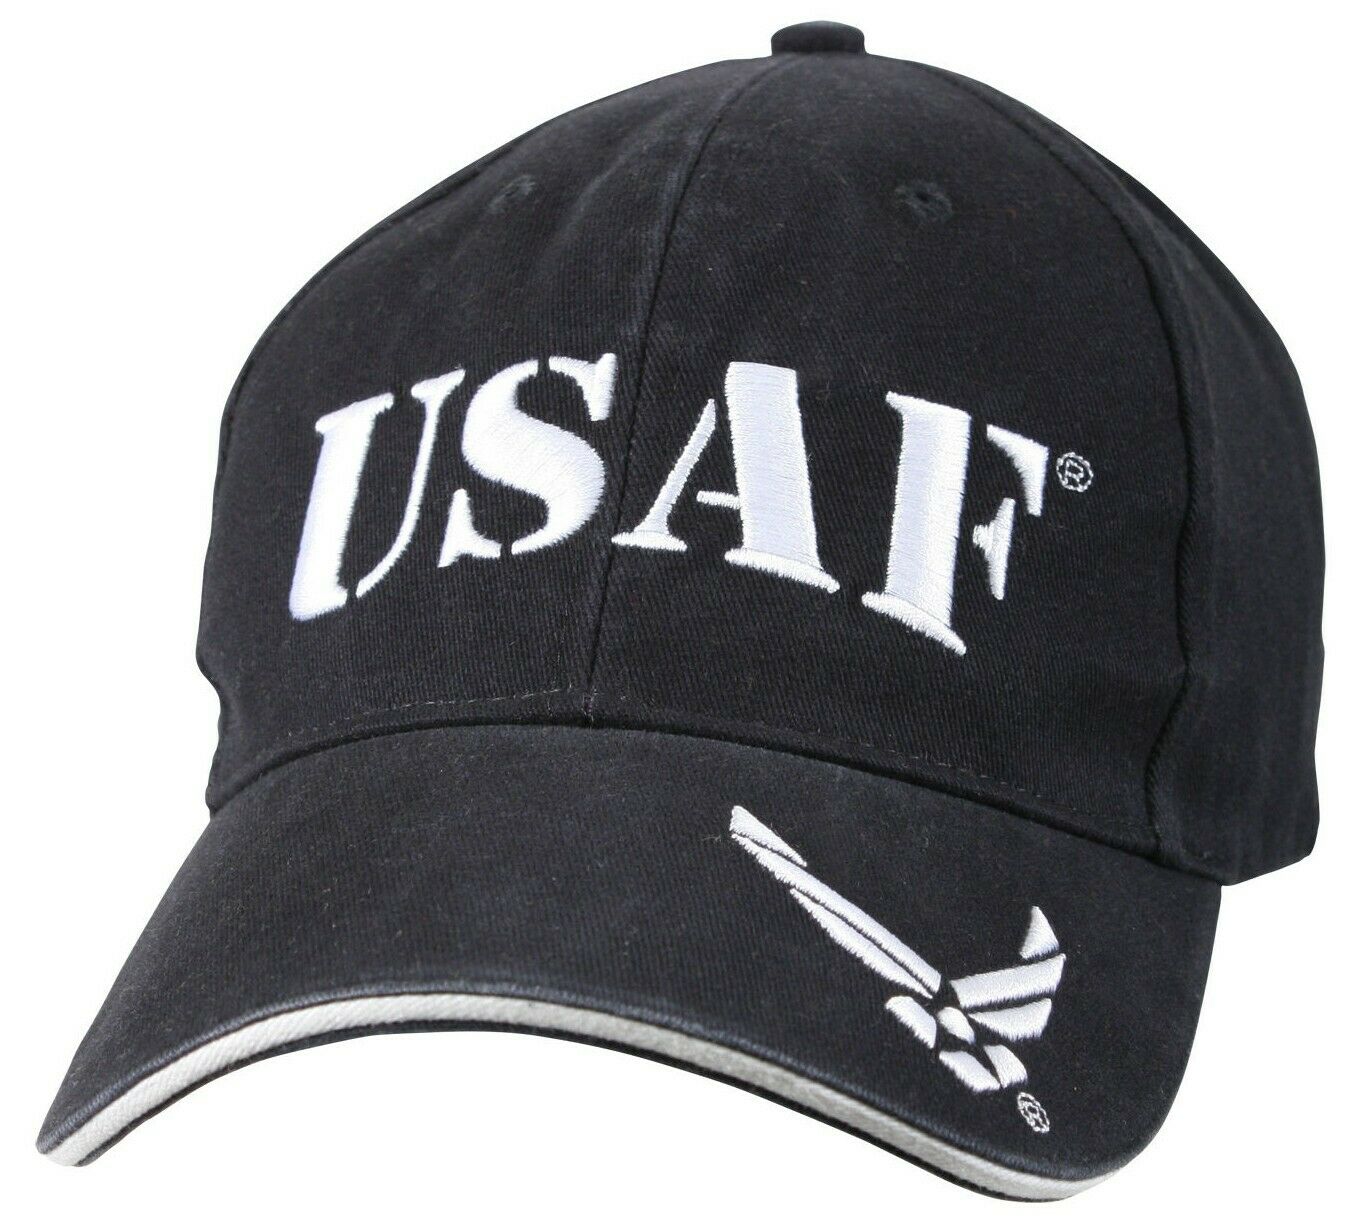 Rothco Vintage USAF US Air Force Low Profile Cap